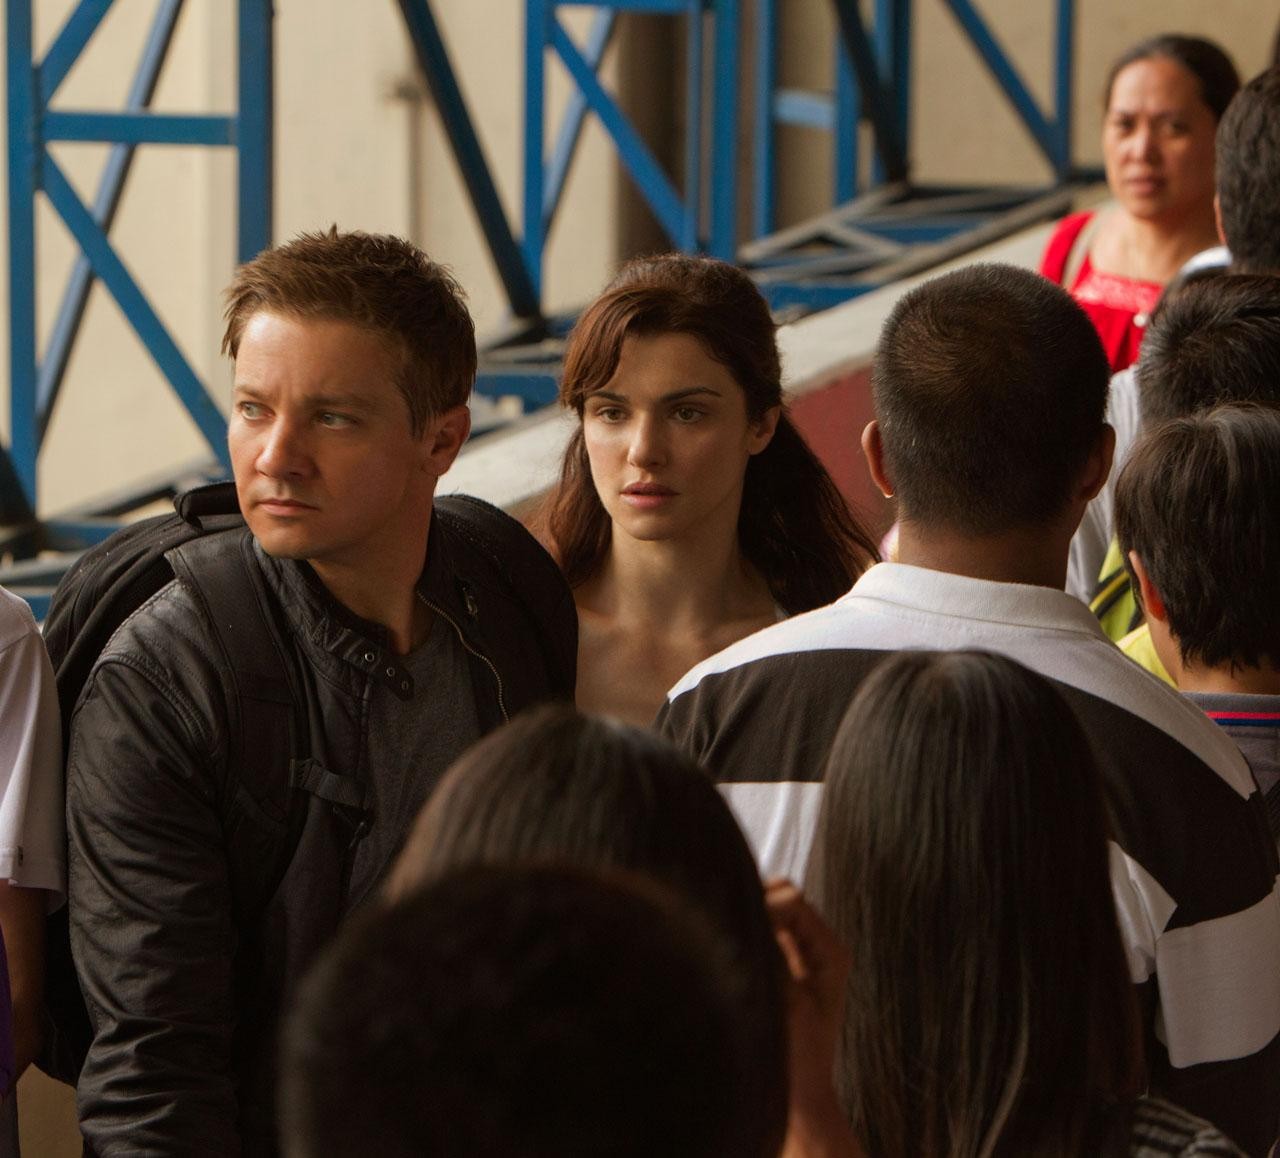 woman and man in a crowd in THE BOURNE LEGACY